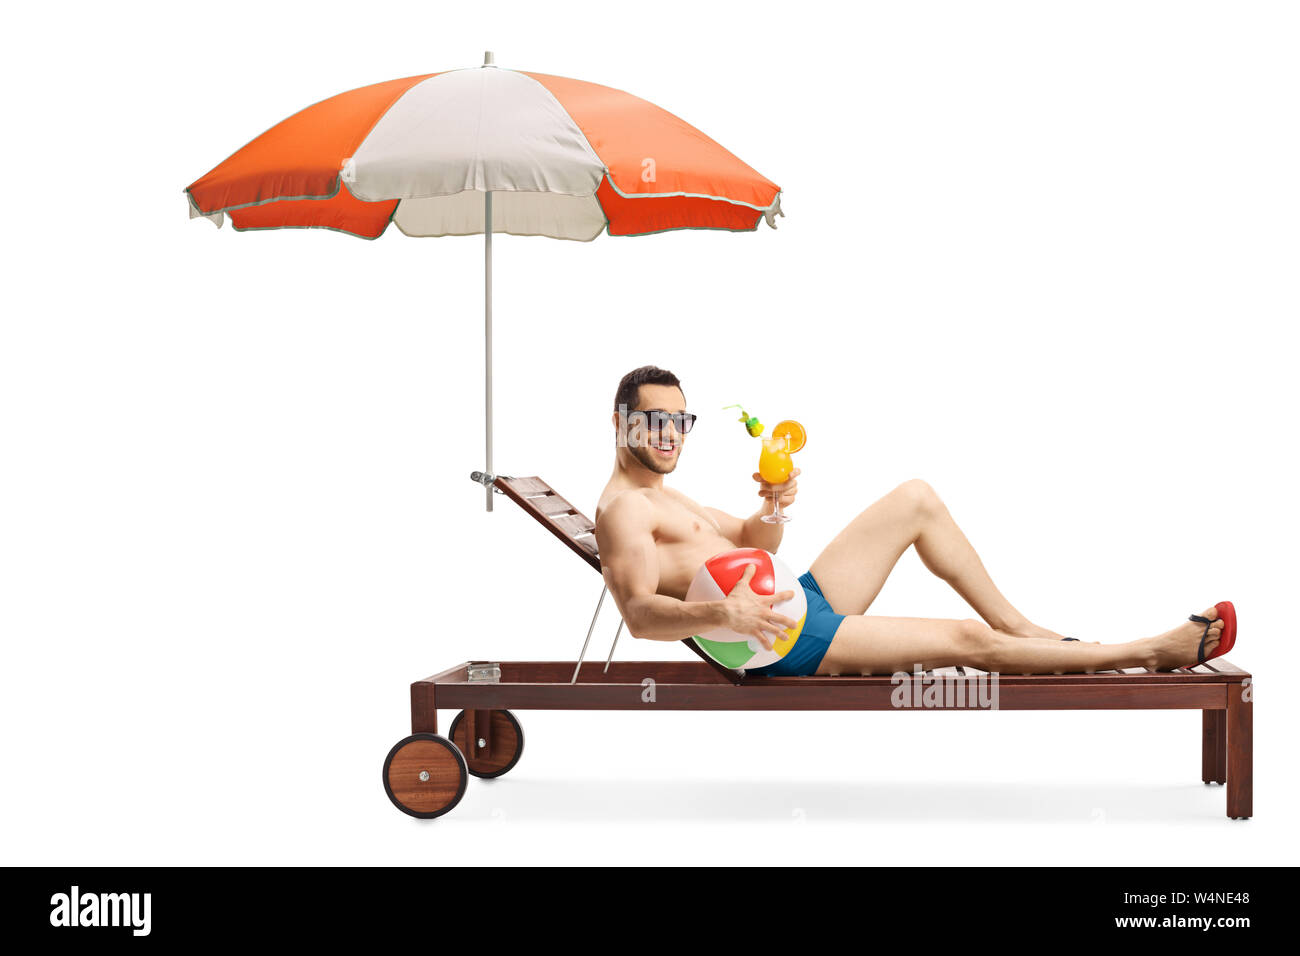 Full length shot of a young man on a sunbed with an umbrella holding an inflatable ball and a cocktail isolated on white background Stock Photo